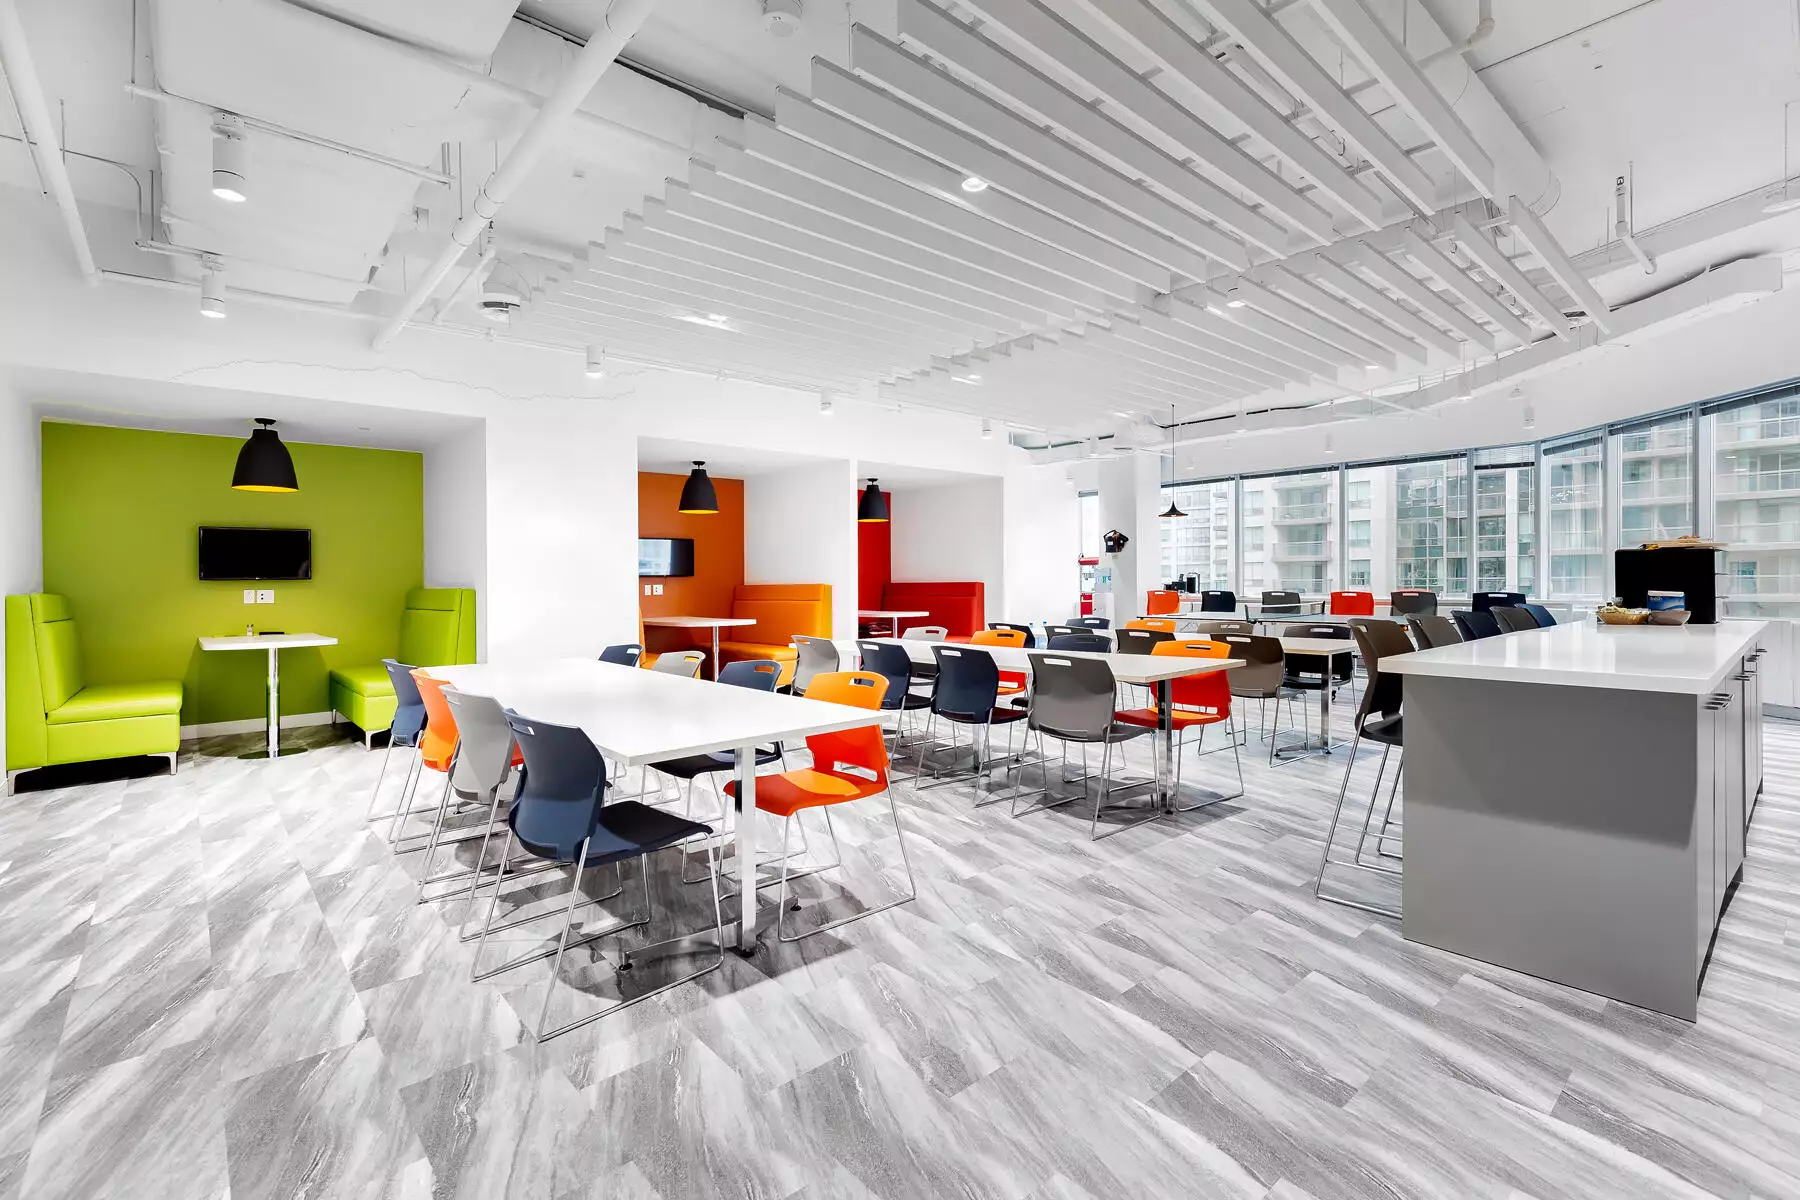 Modern office break room in the banking industry with colorful furniture, green and orange accents, and large windows.